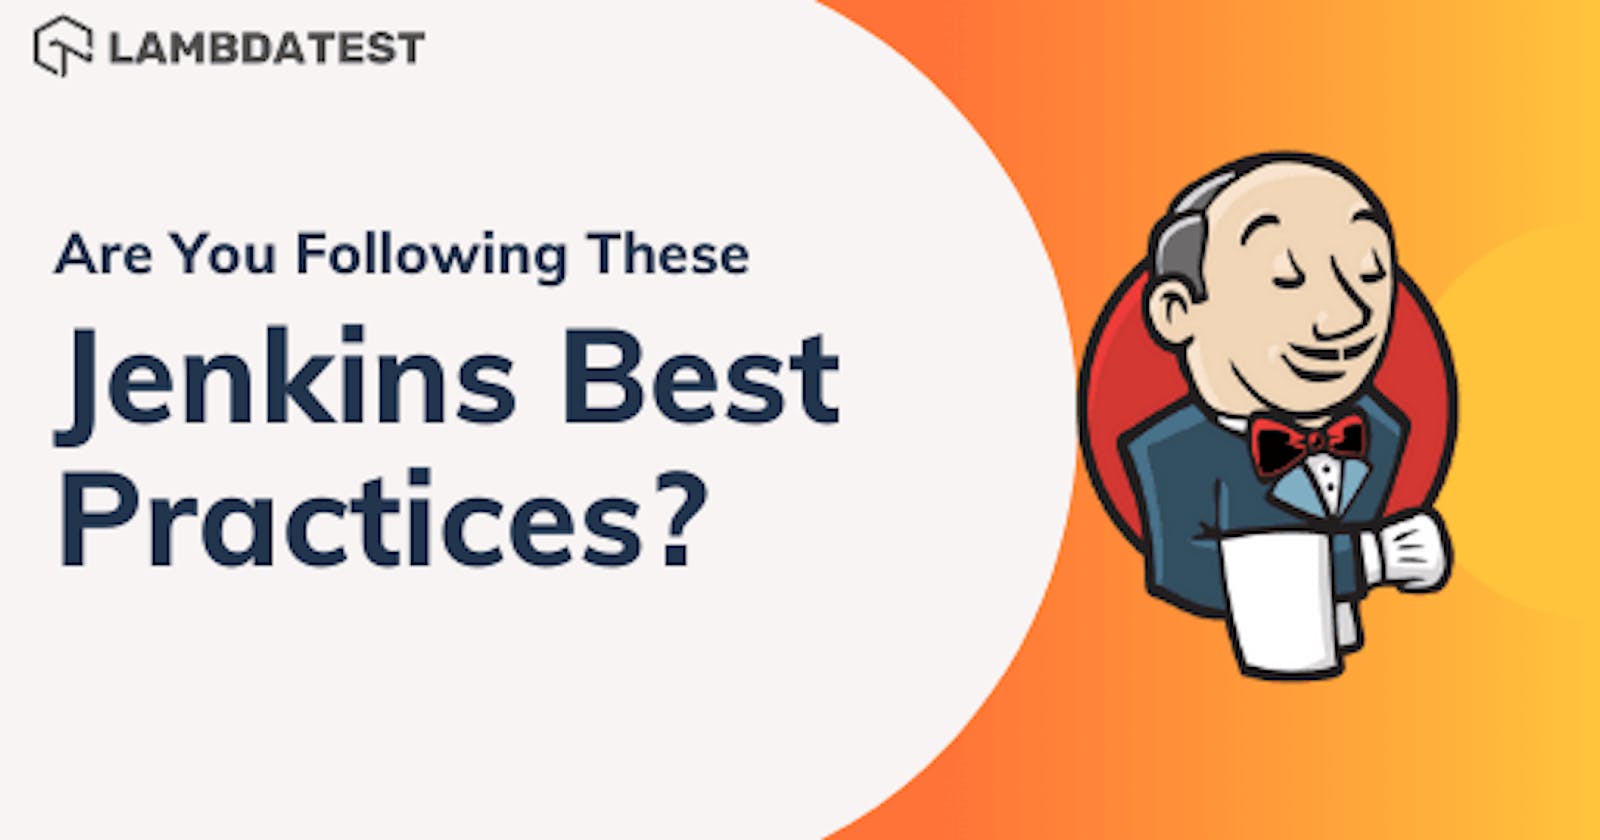 Are You Following These Jenkins Best Practices?